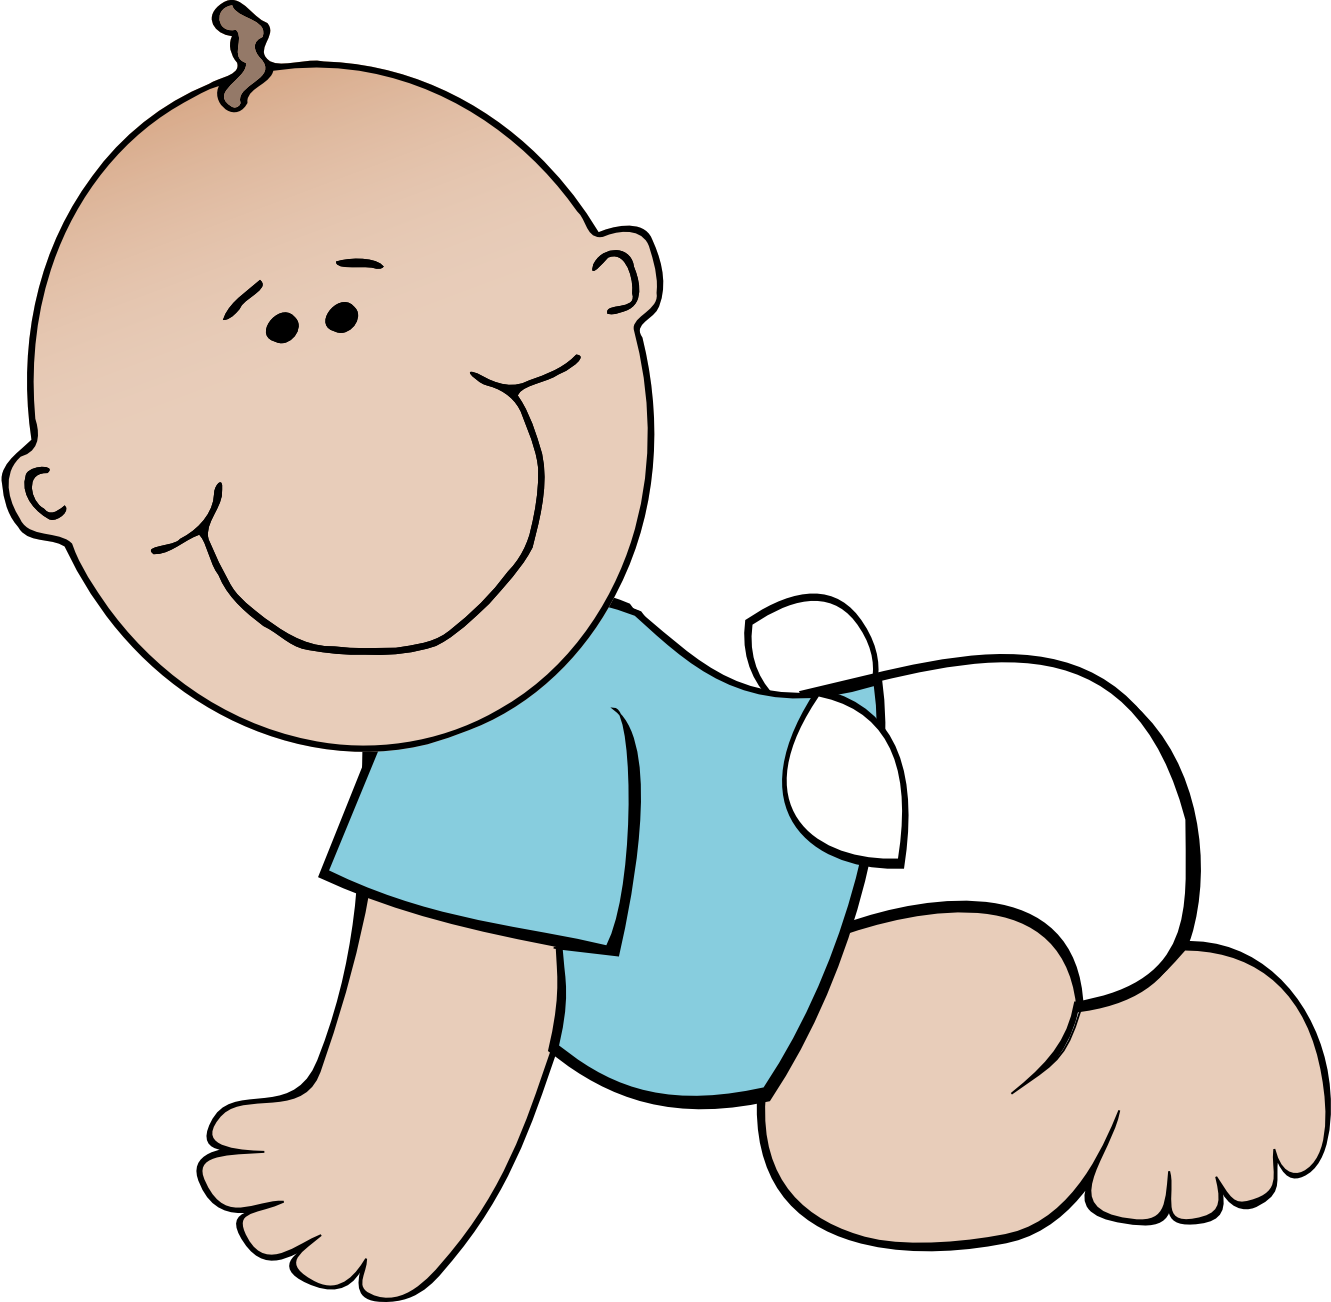 Baby Boy Crawling | Clipart Panda - Free Clipart Images